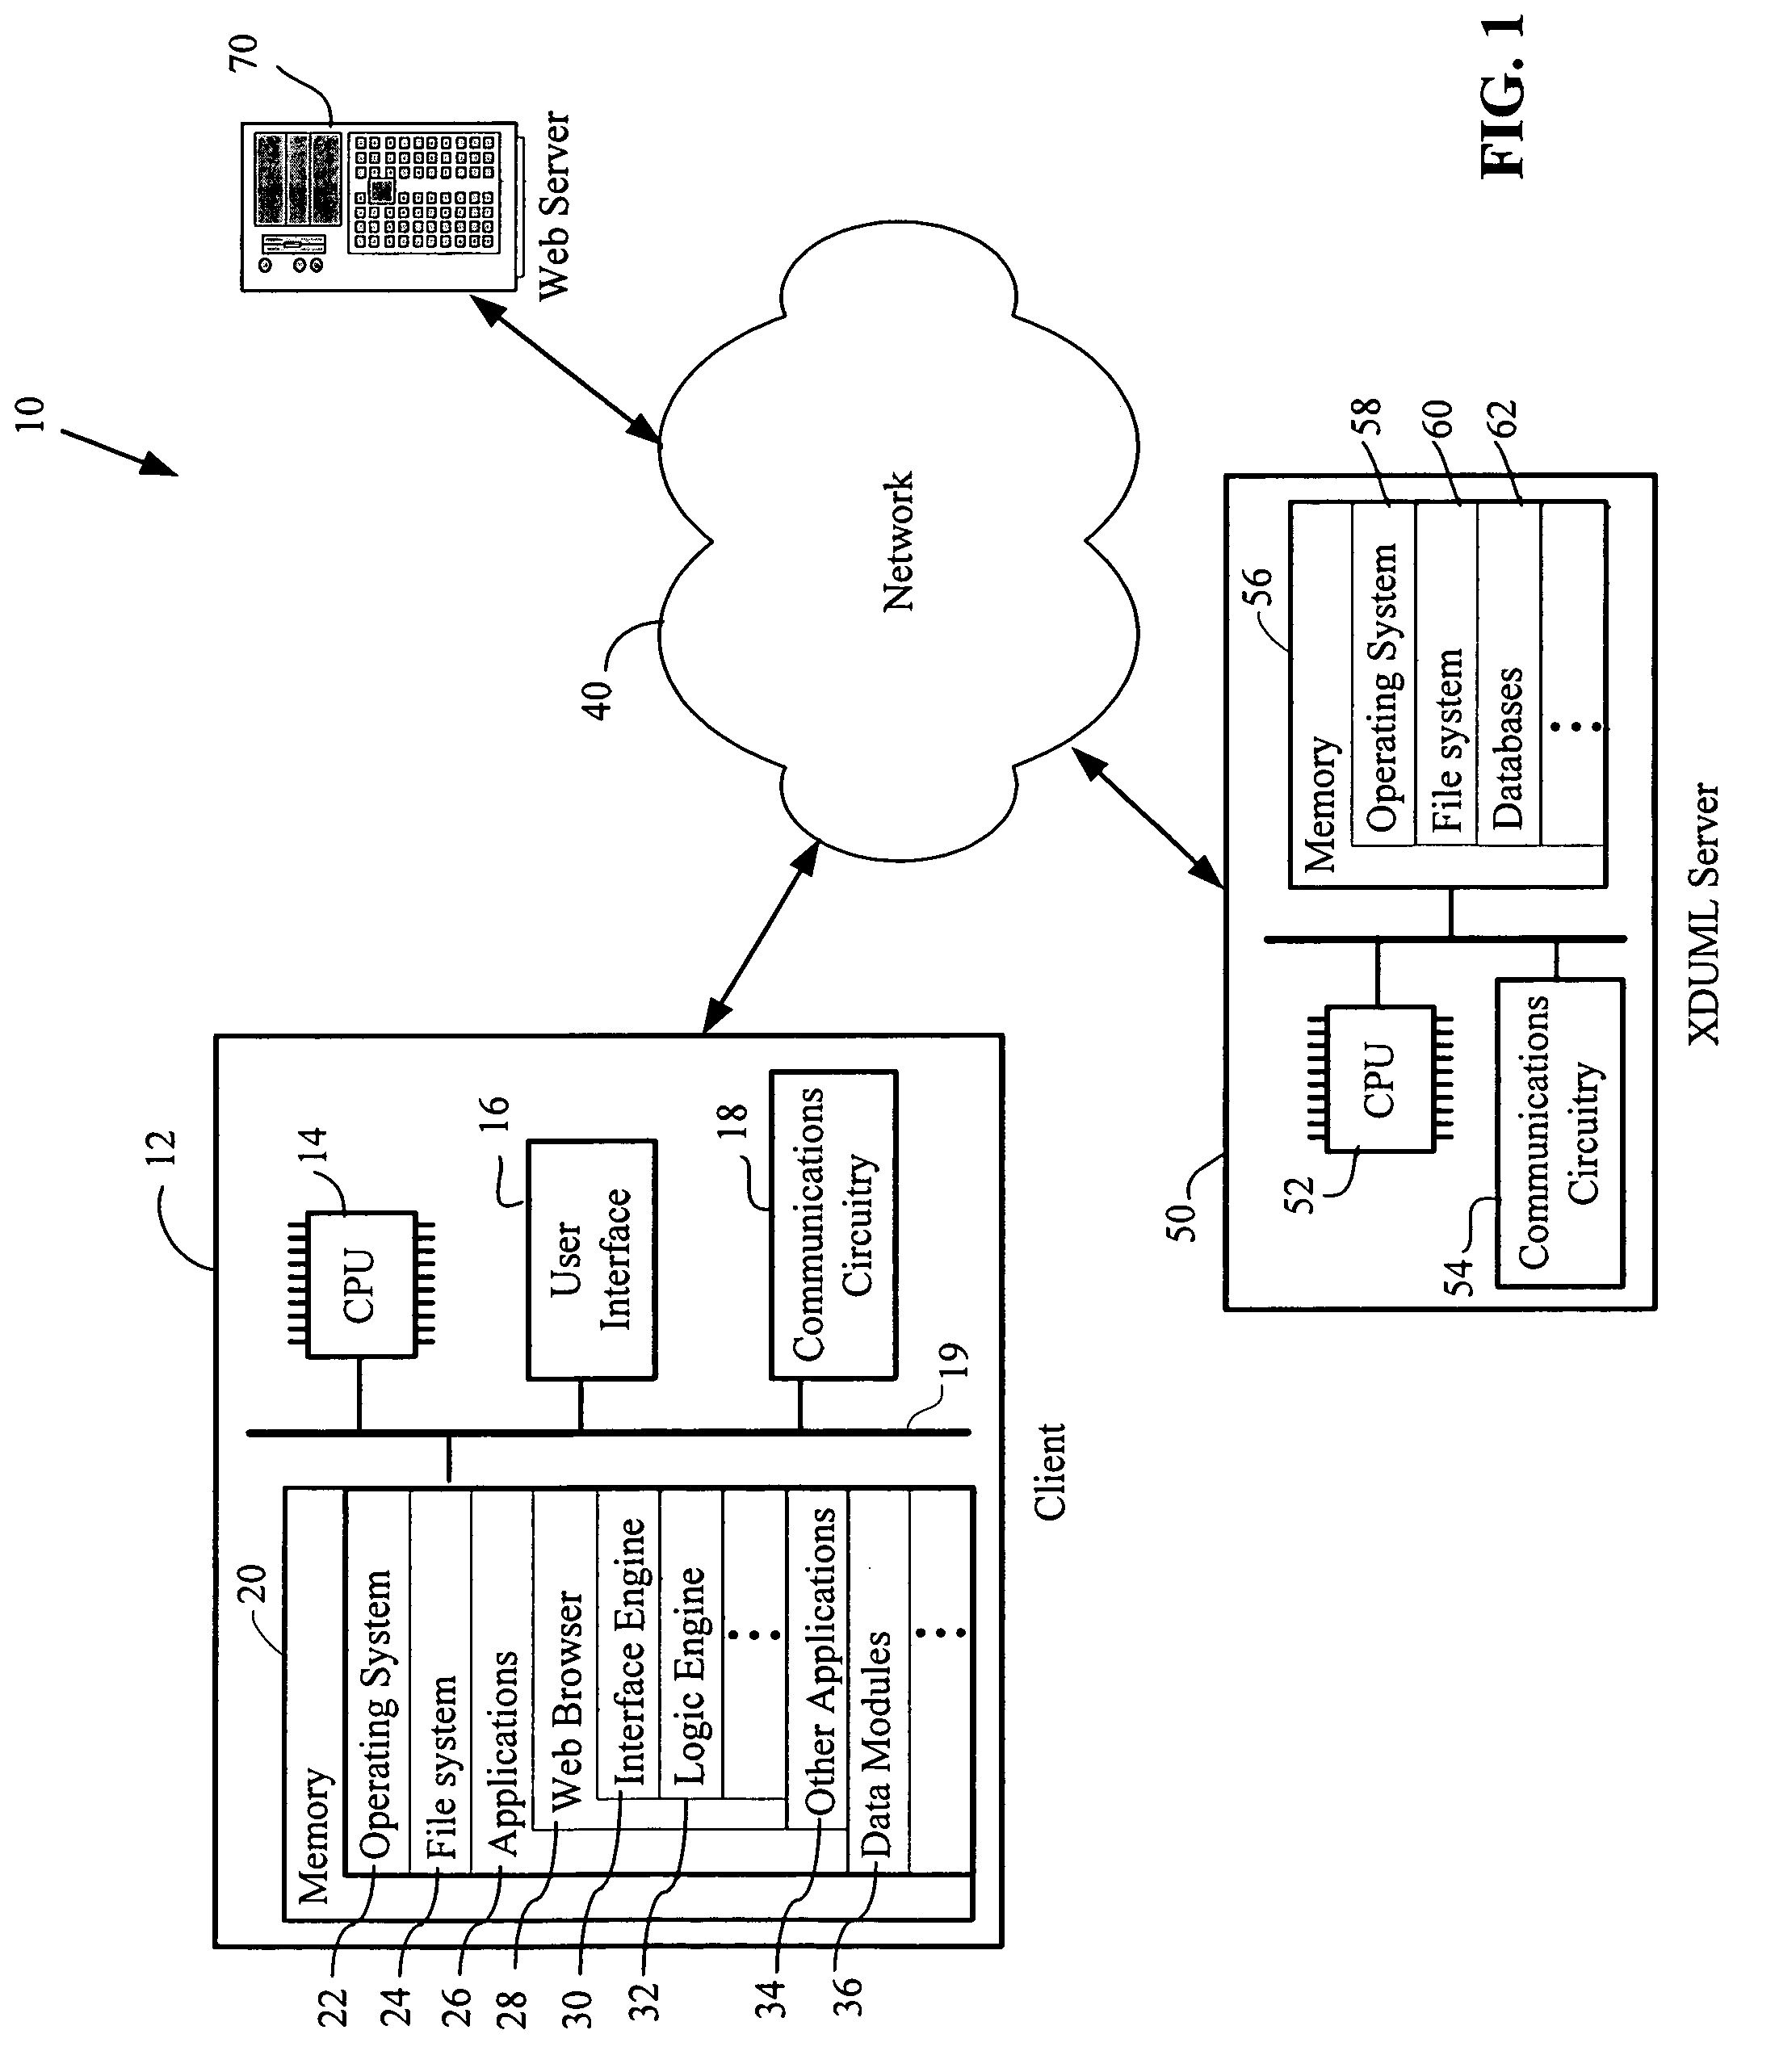 Systems and methods for creating customized applications